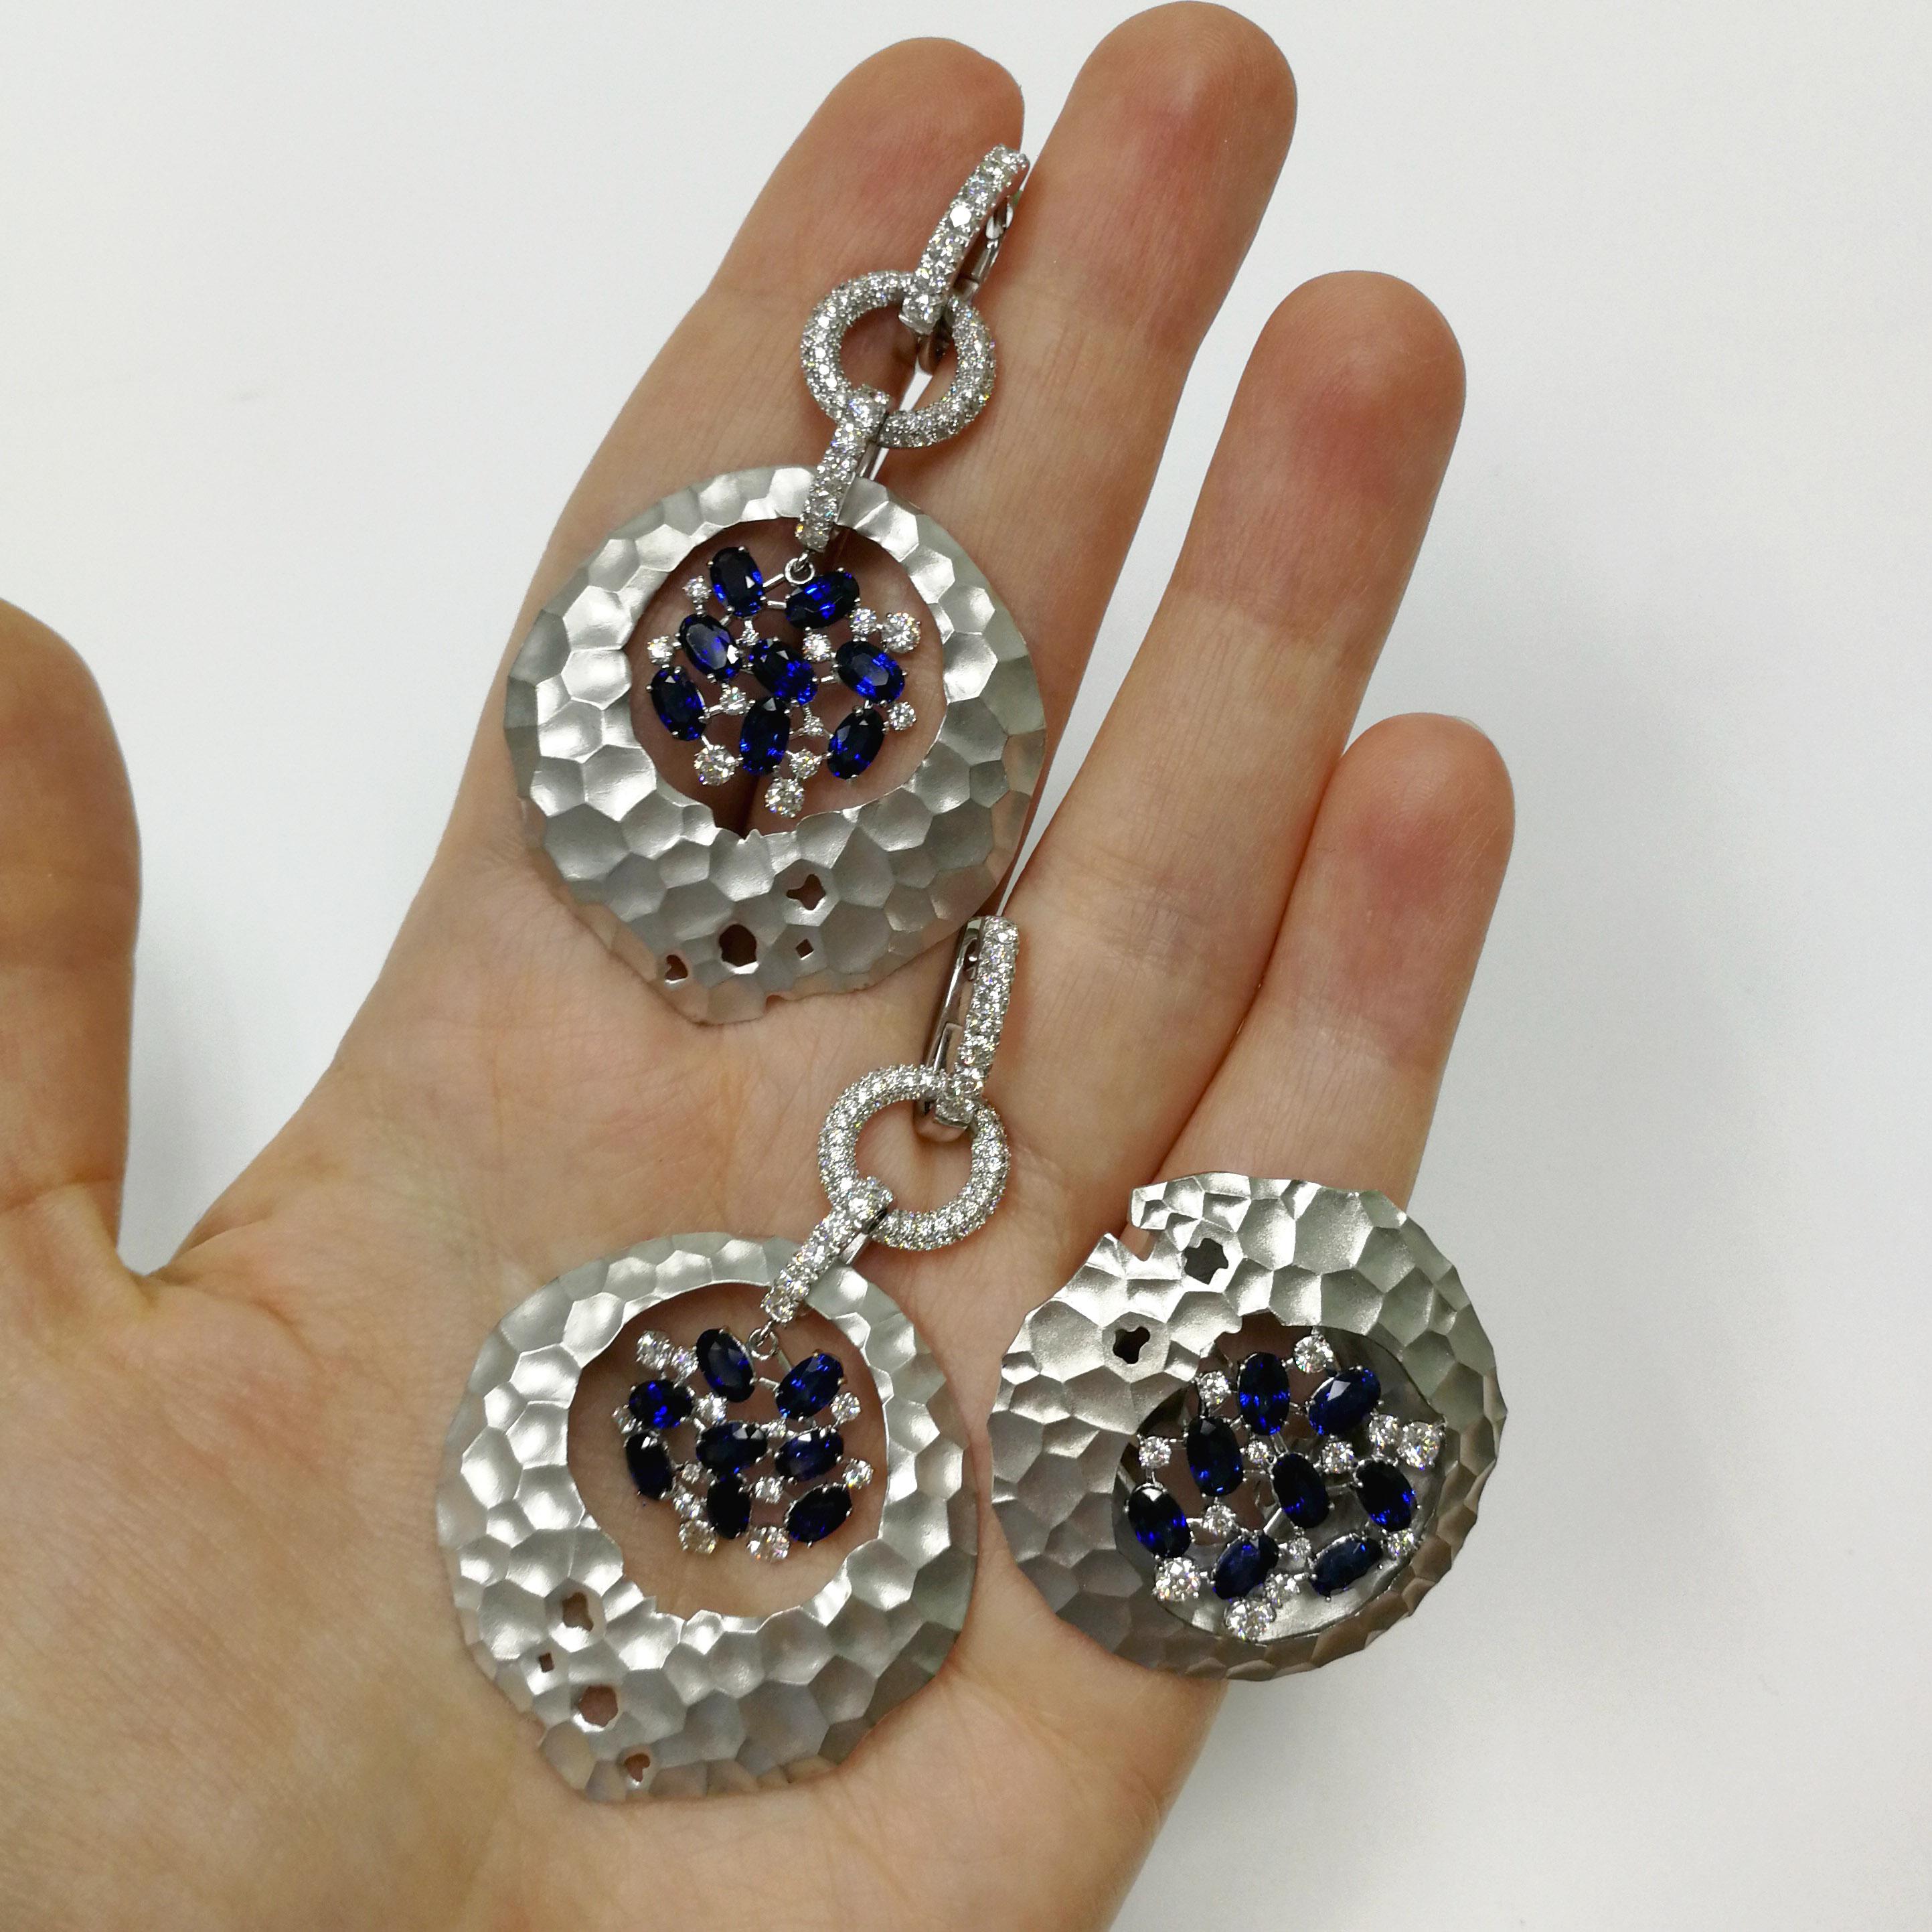 Blue Sapphires Diamonds 18 Karat White Gold Big Oasis Suite
Hot desert - nothing alive around. But it is necessary to appear a sip of water, and life awakens. It was the deserts that inspired our designers to create this Suite. Incredibly dry, the